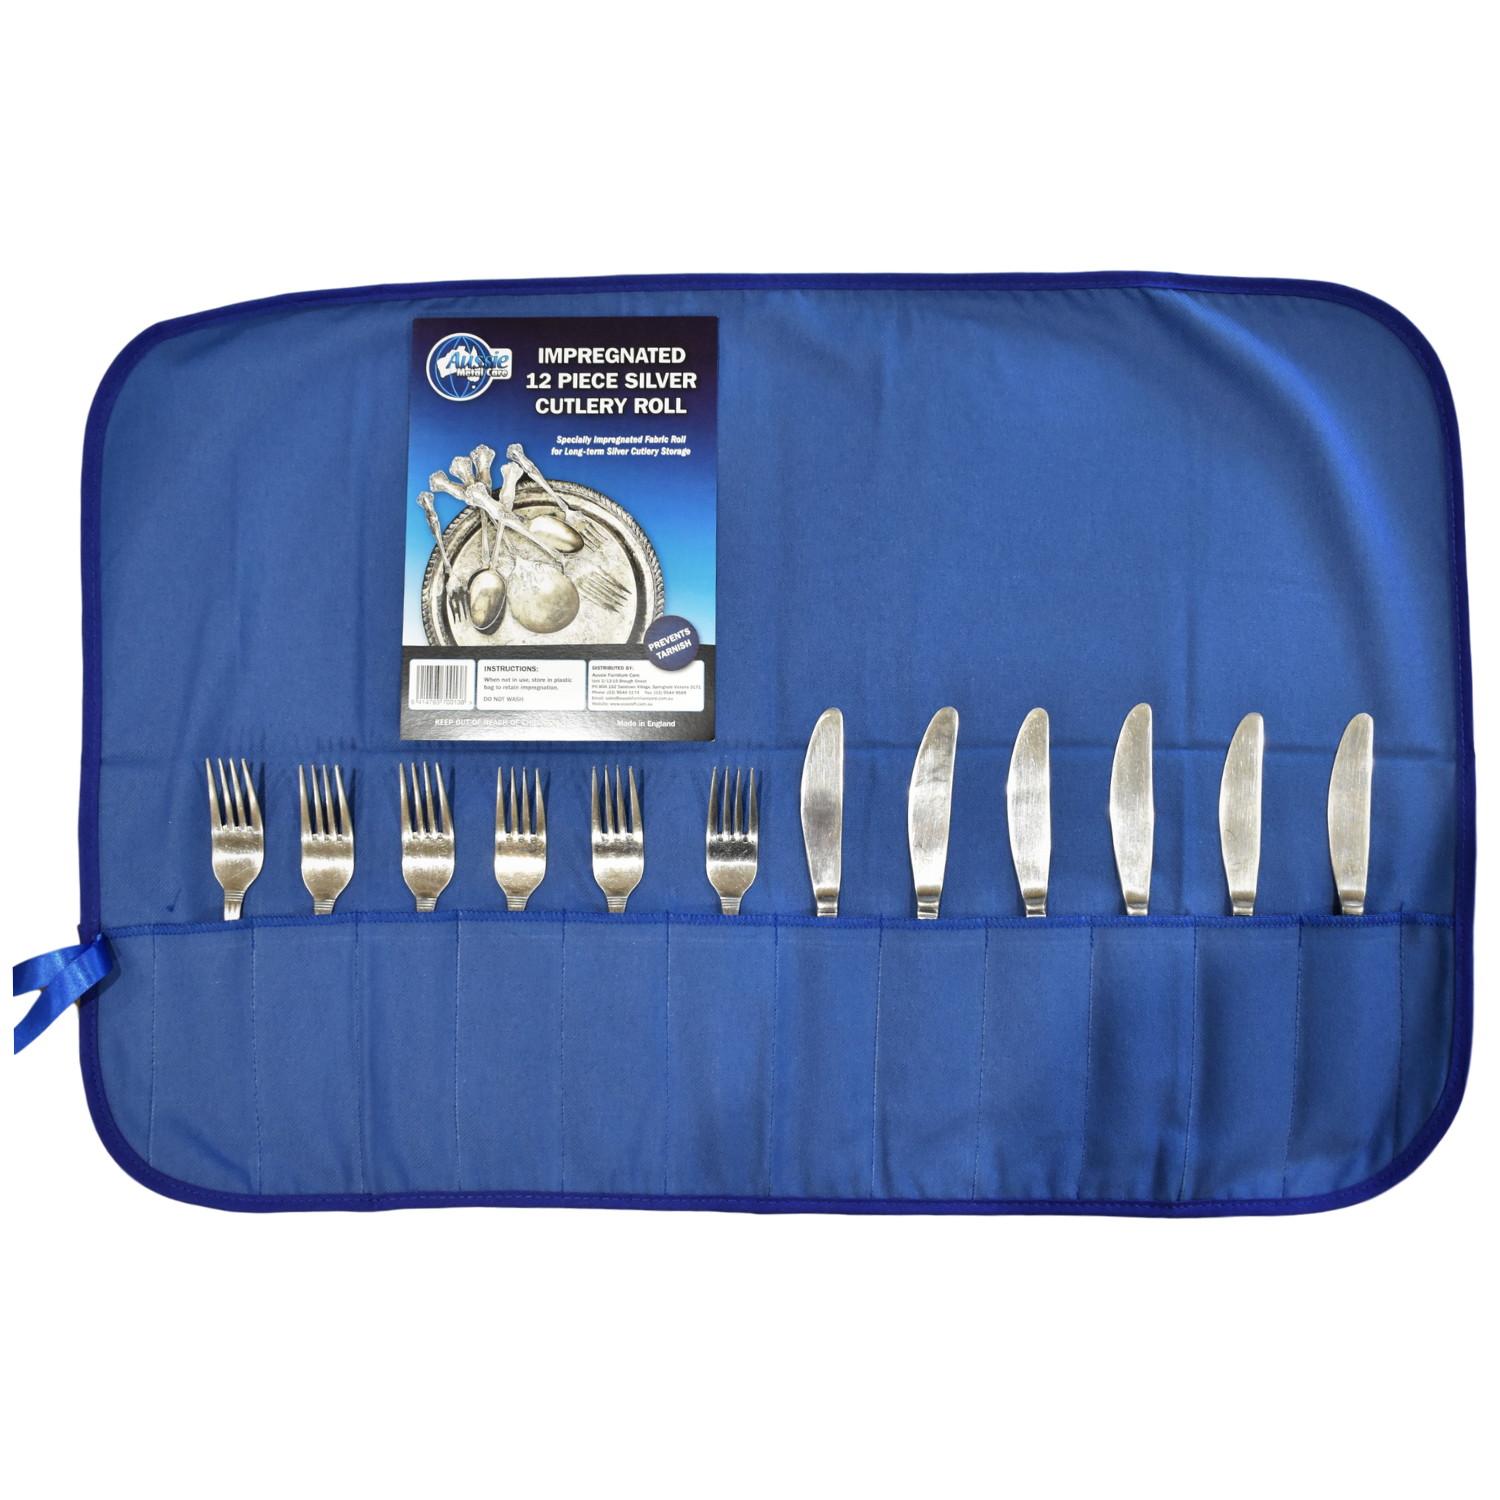 Silver Cutlery Storage Roll with Cutlery in It